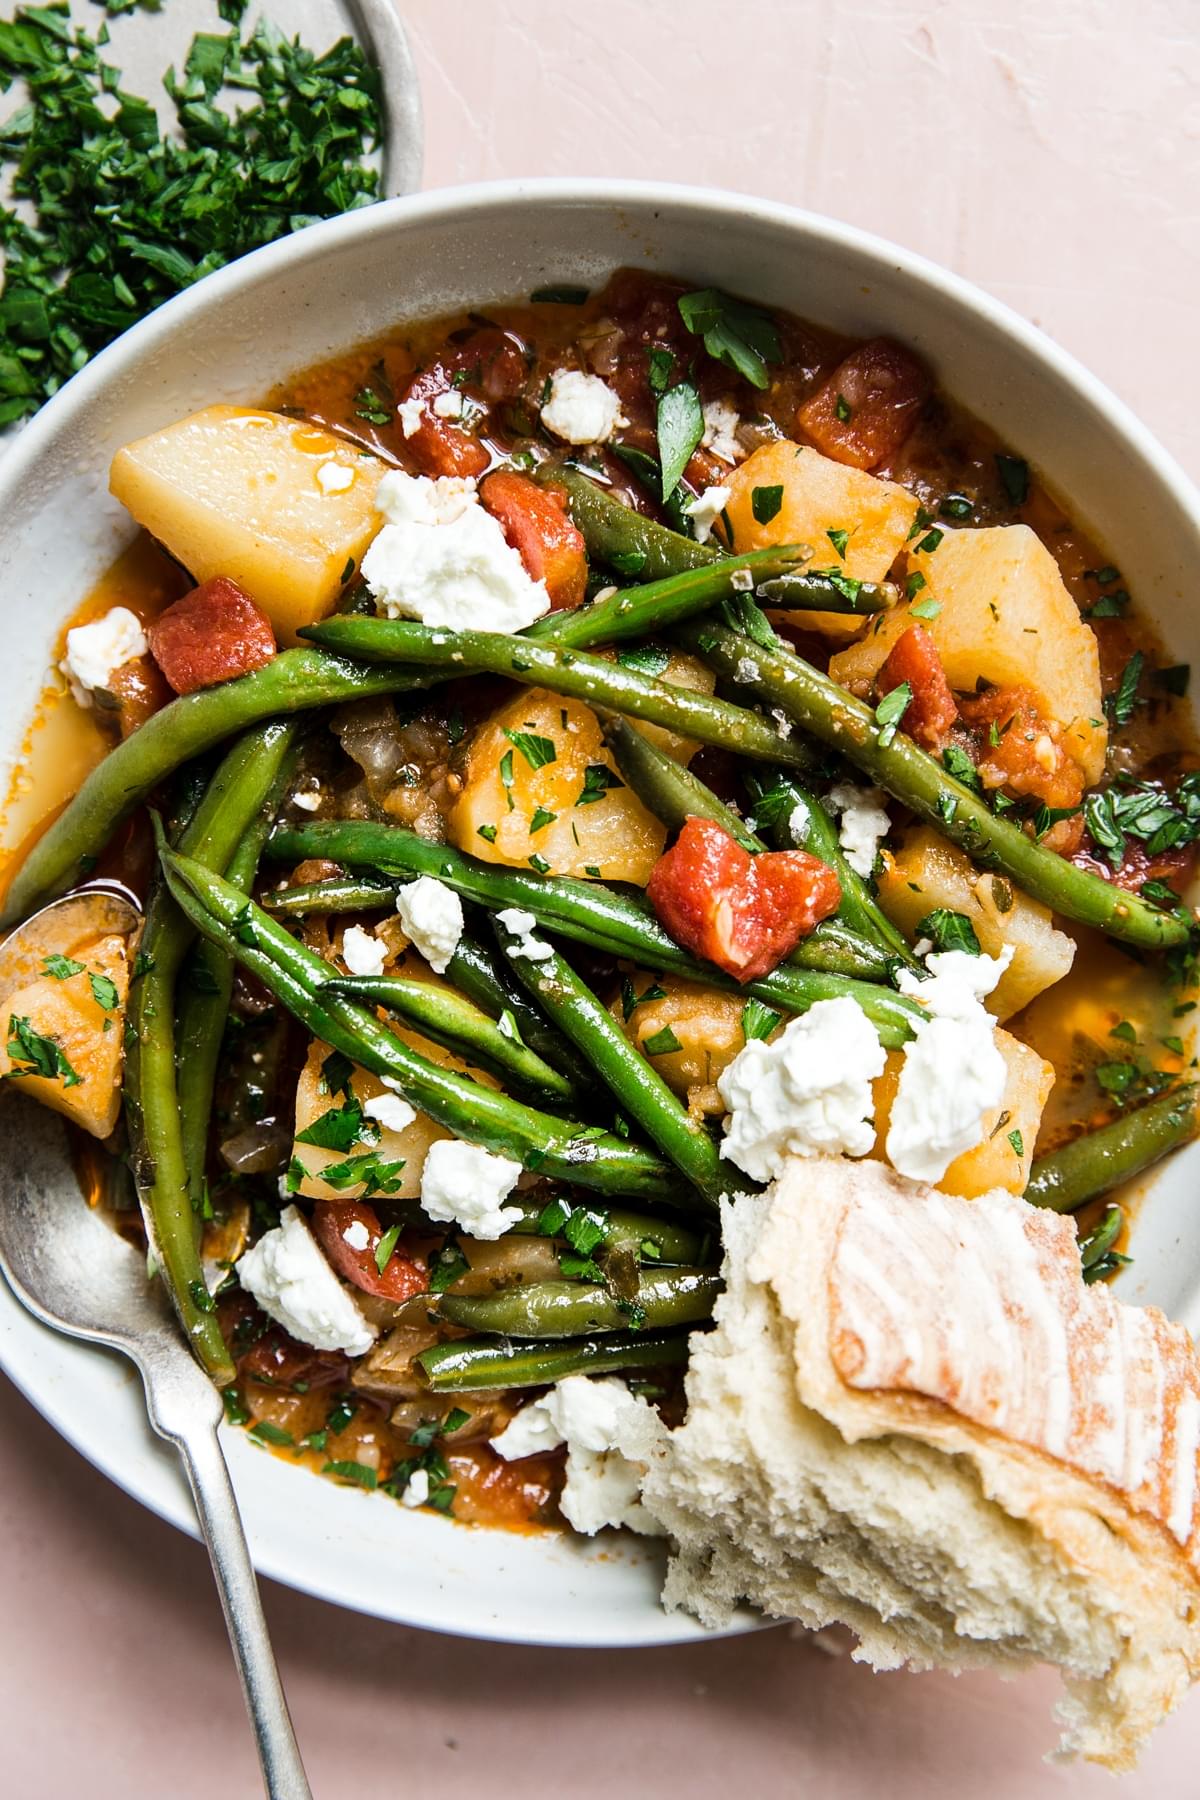 Fasolakia Greek Green Beans dish with potatoes and tomatoes in a bowl with a spoon and crusty bread